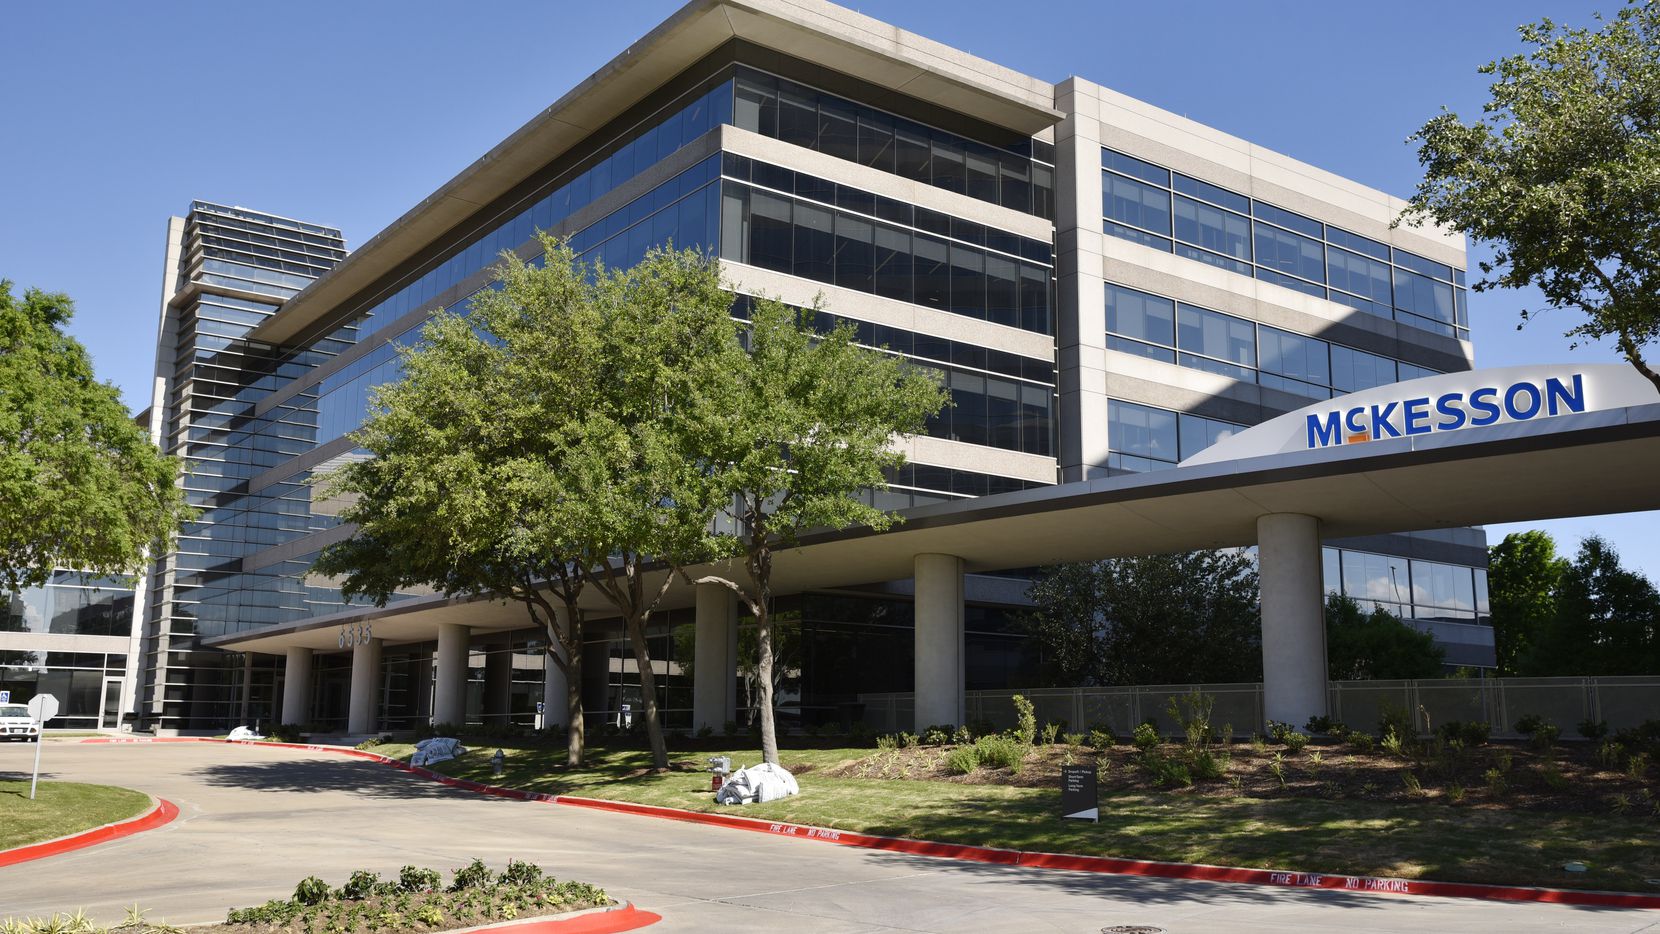 McKesson is the second largest public company headquartered in Dallas-Fort Worth, with...